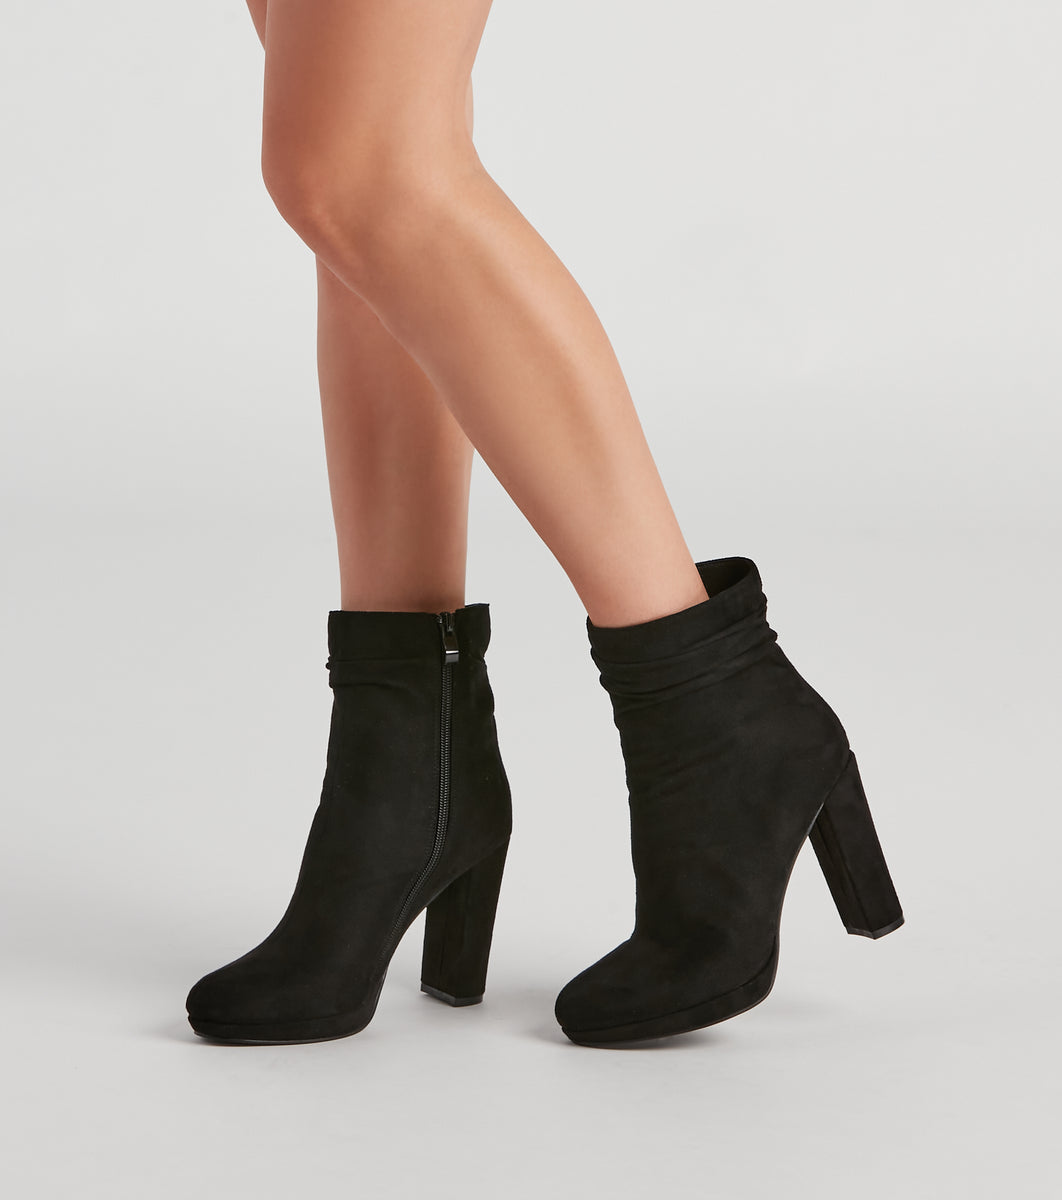 Meet Chic Faux Suede Slouch Booties